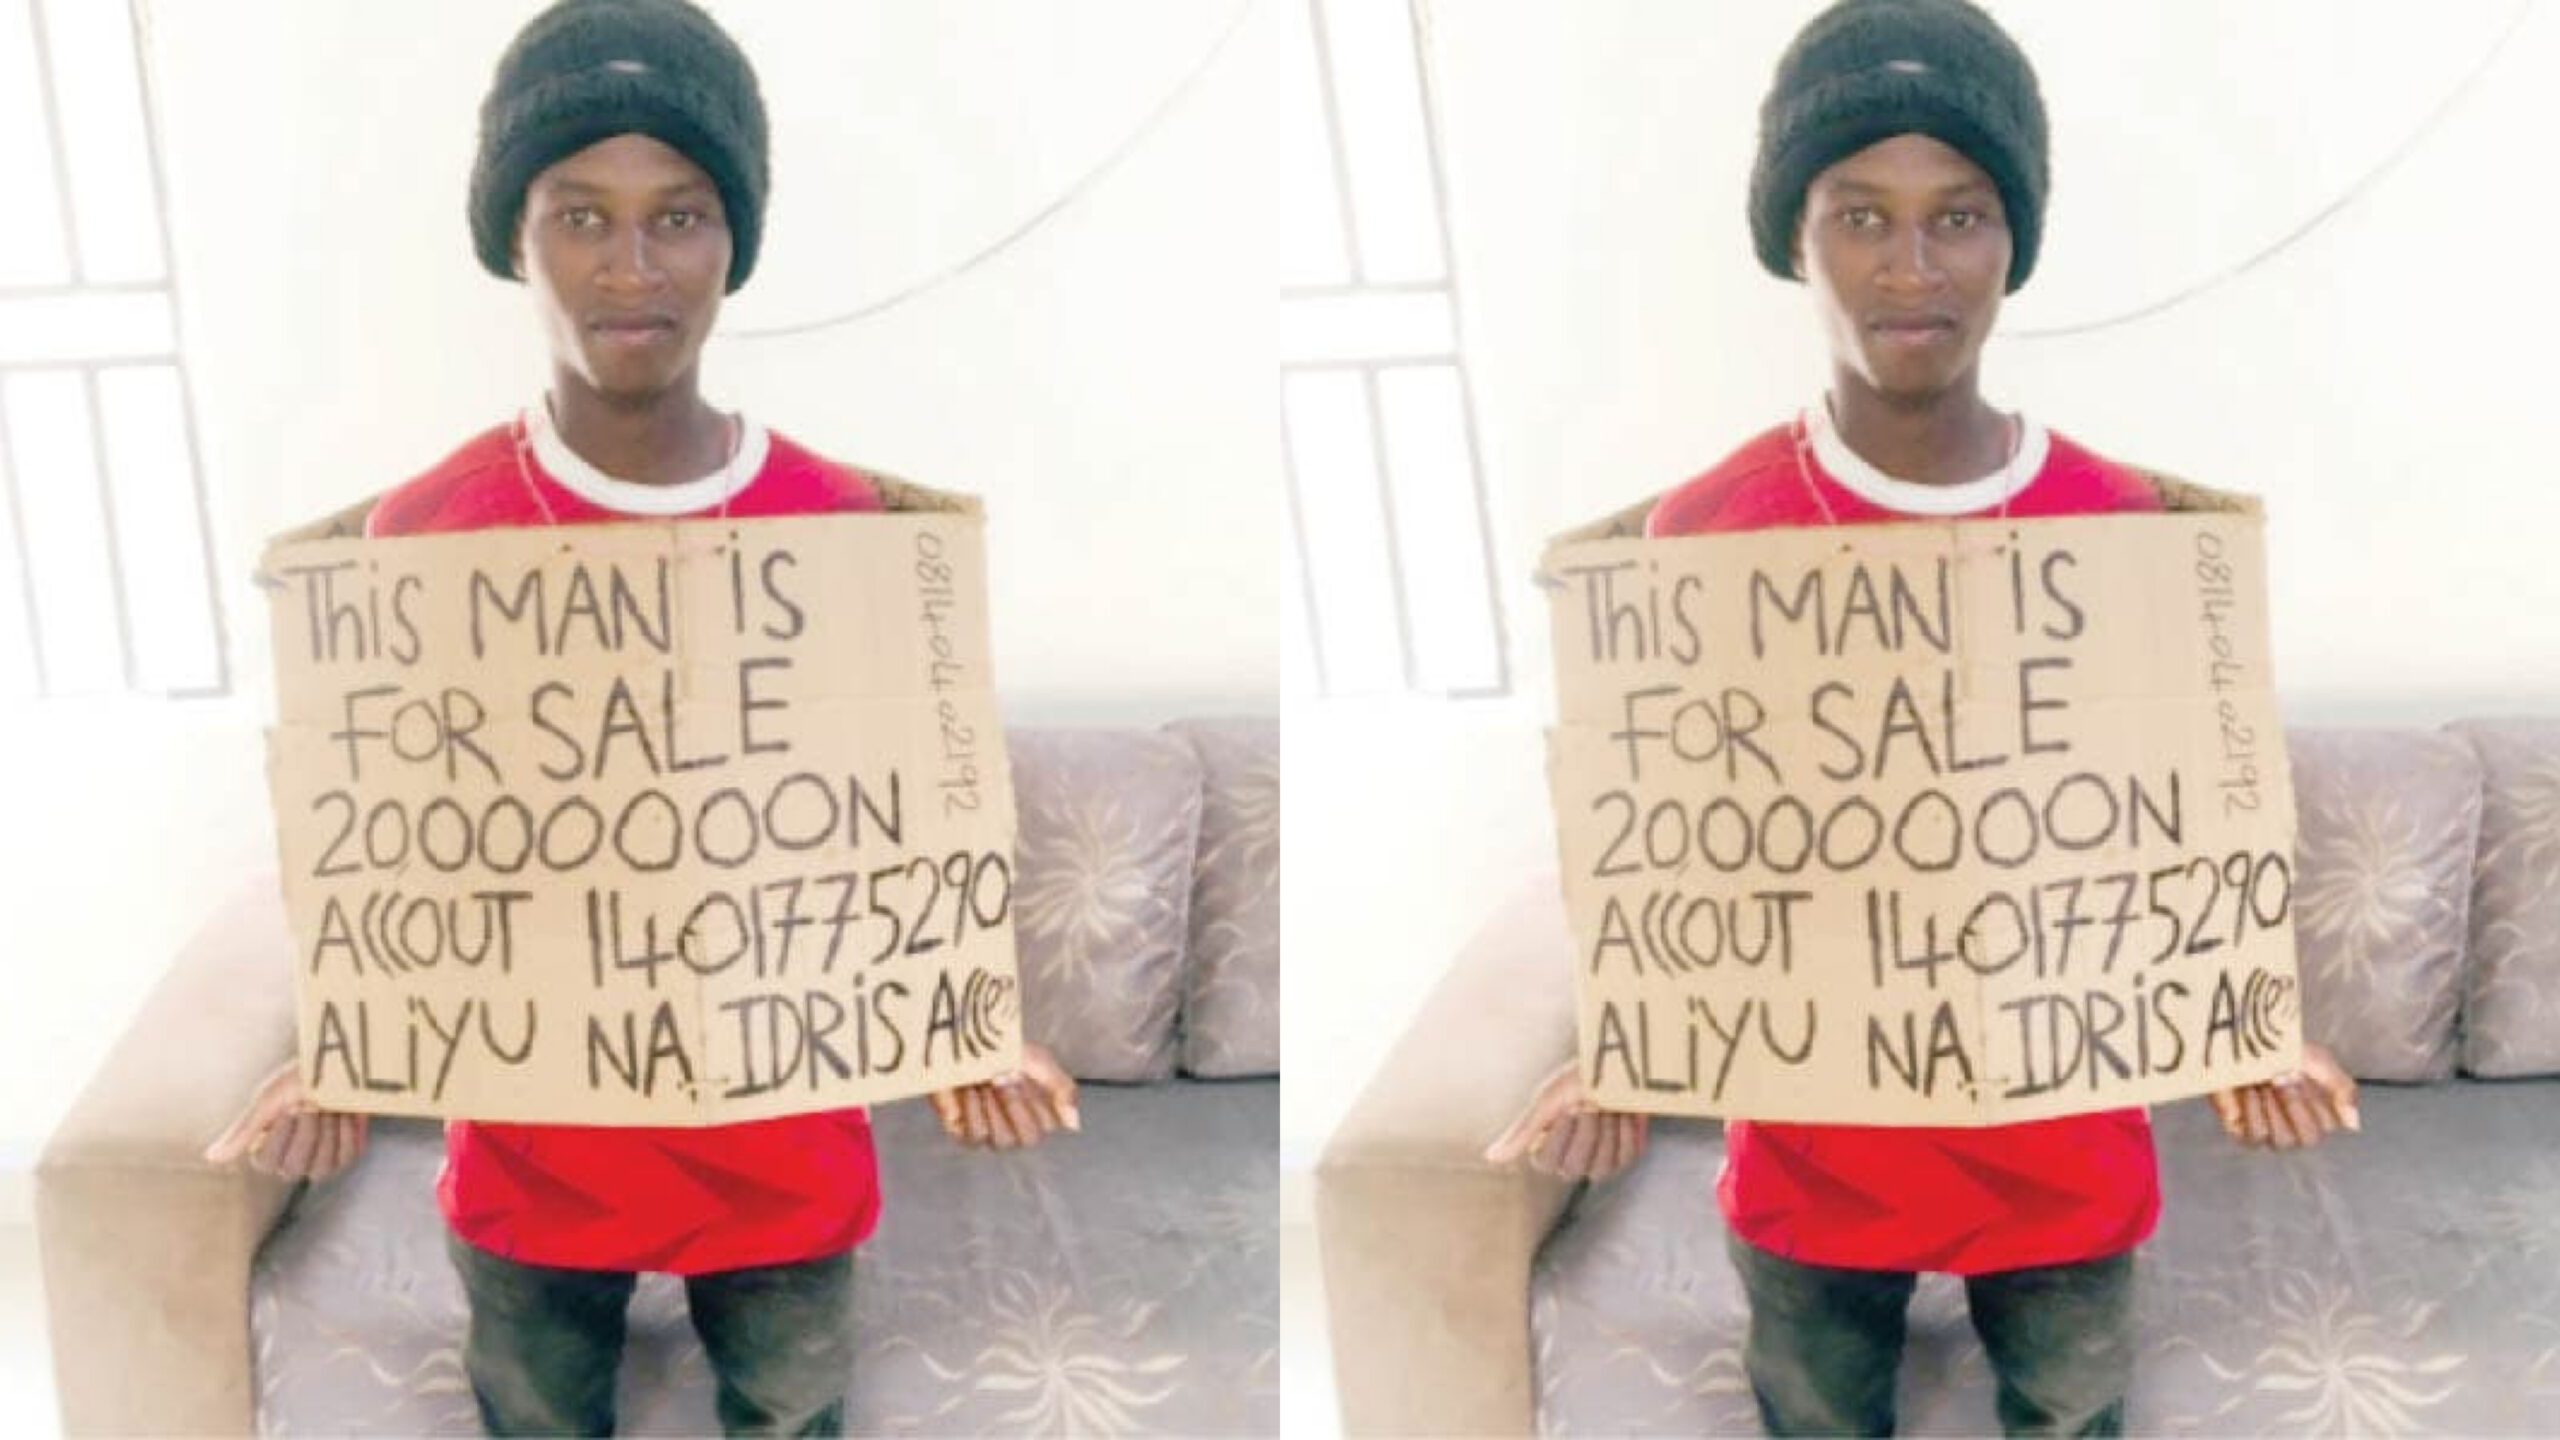 Man puts himself up for sale due to hardship